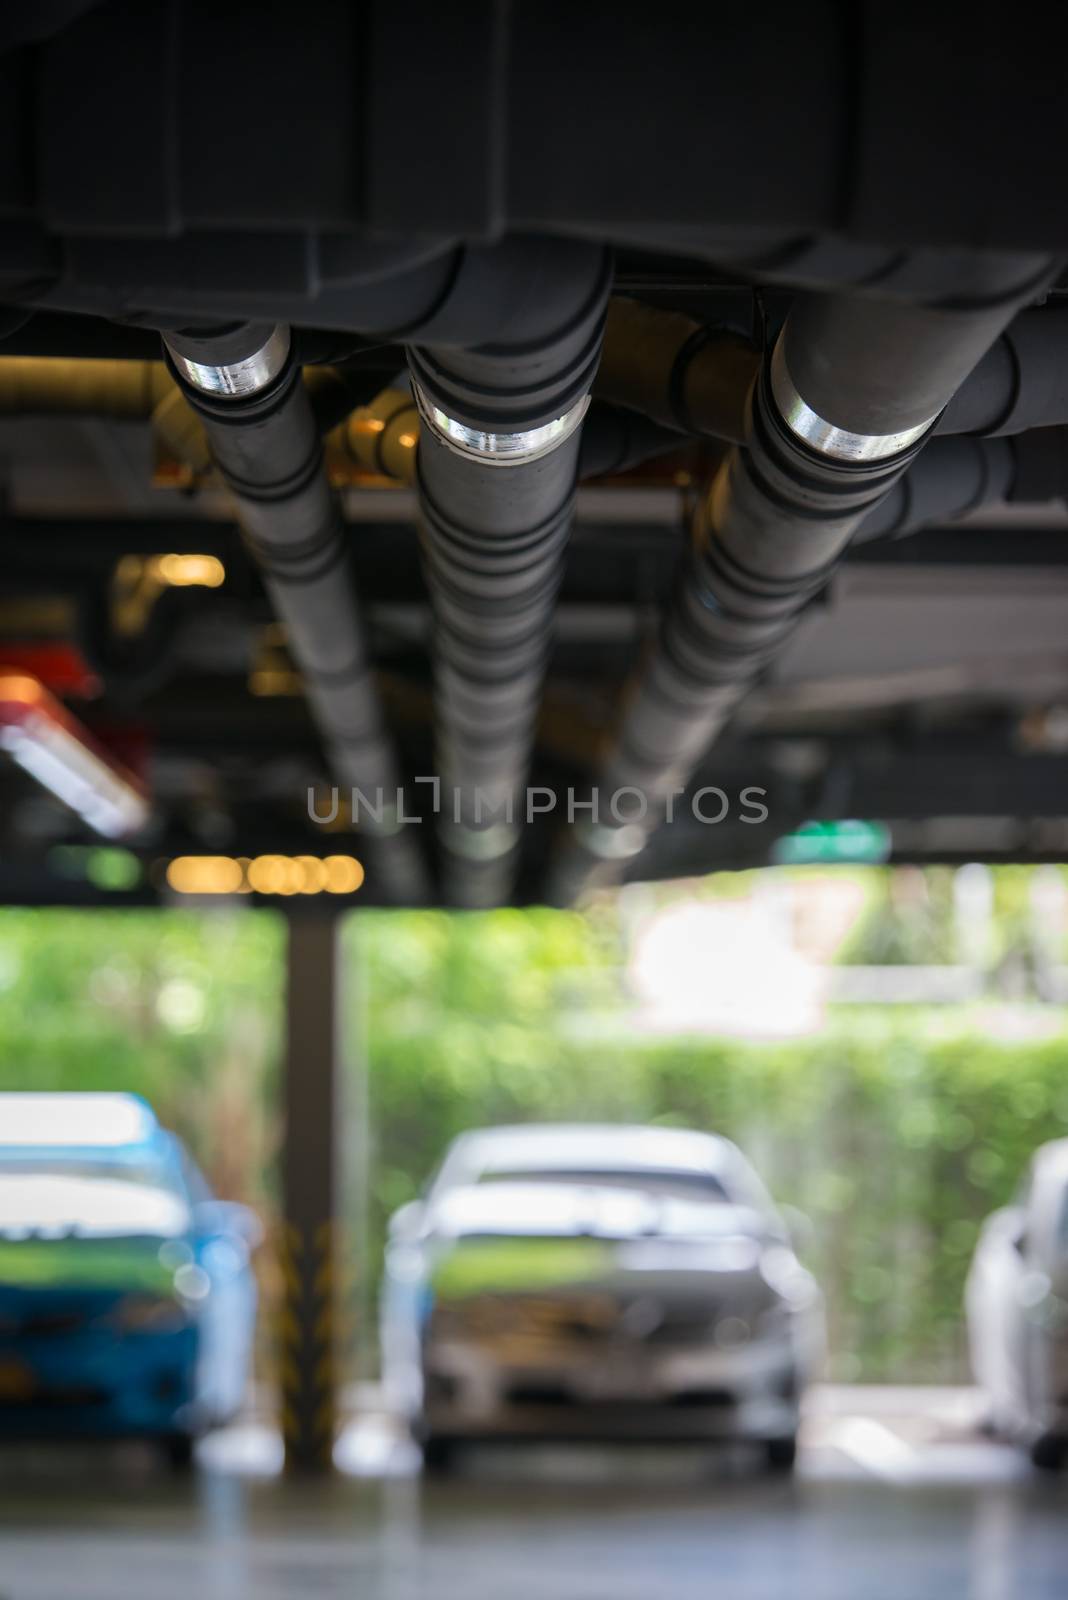 sanitary pipe in car parking by antpkr